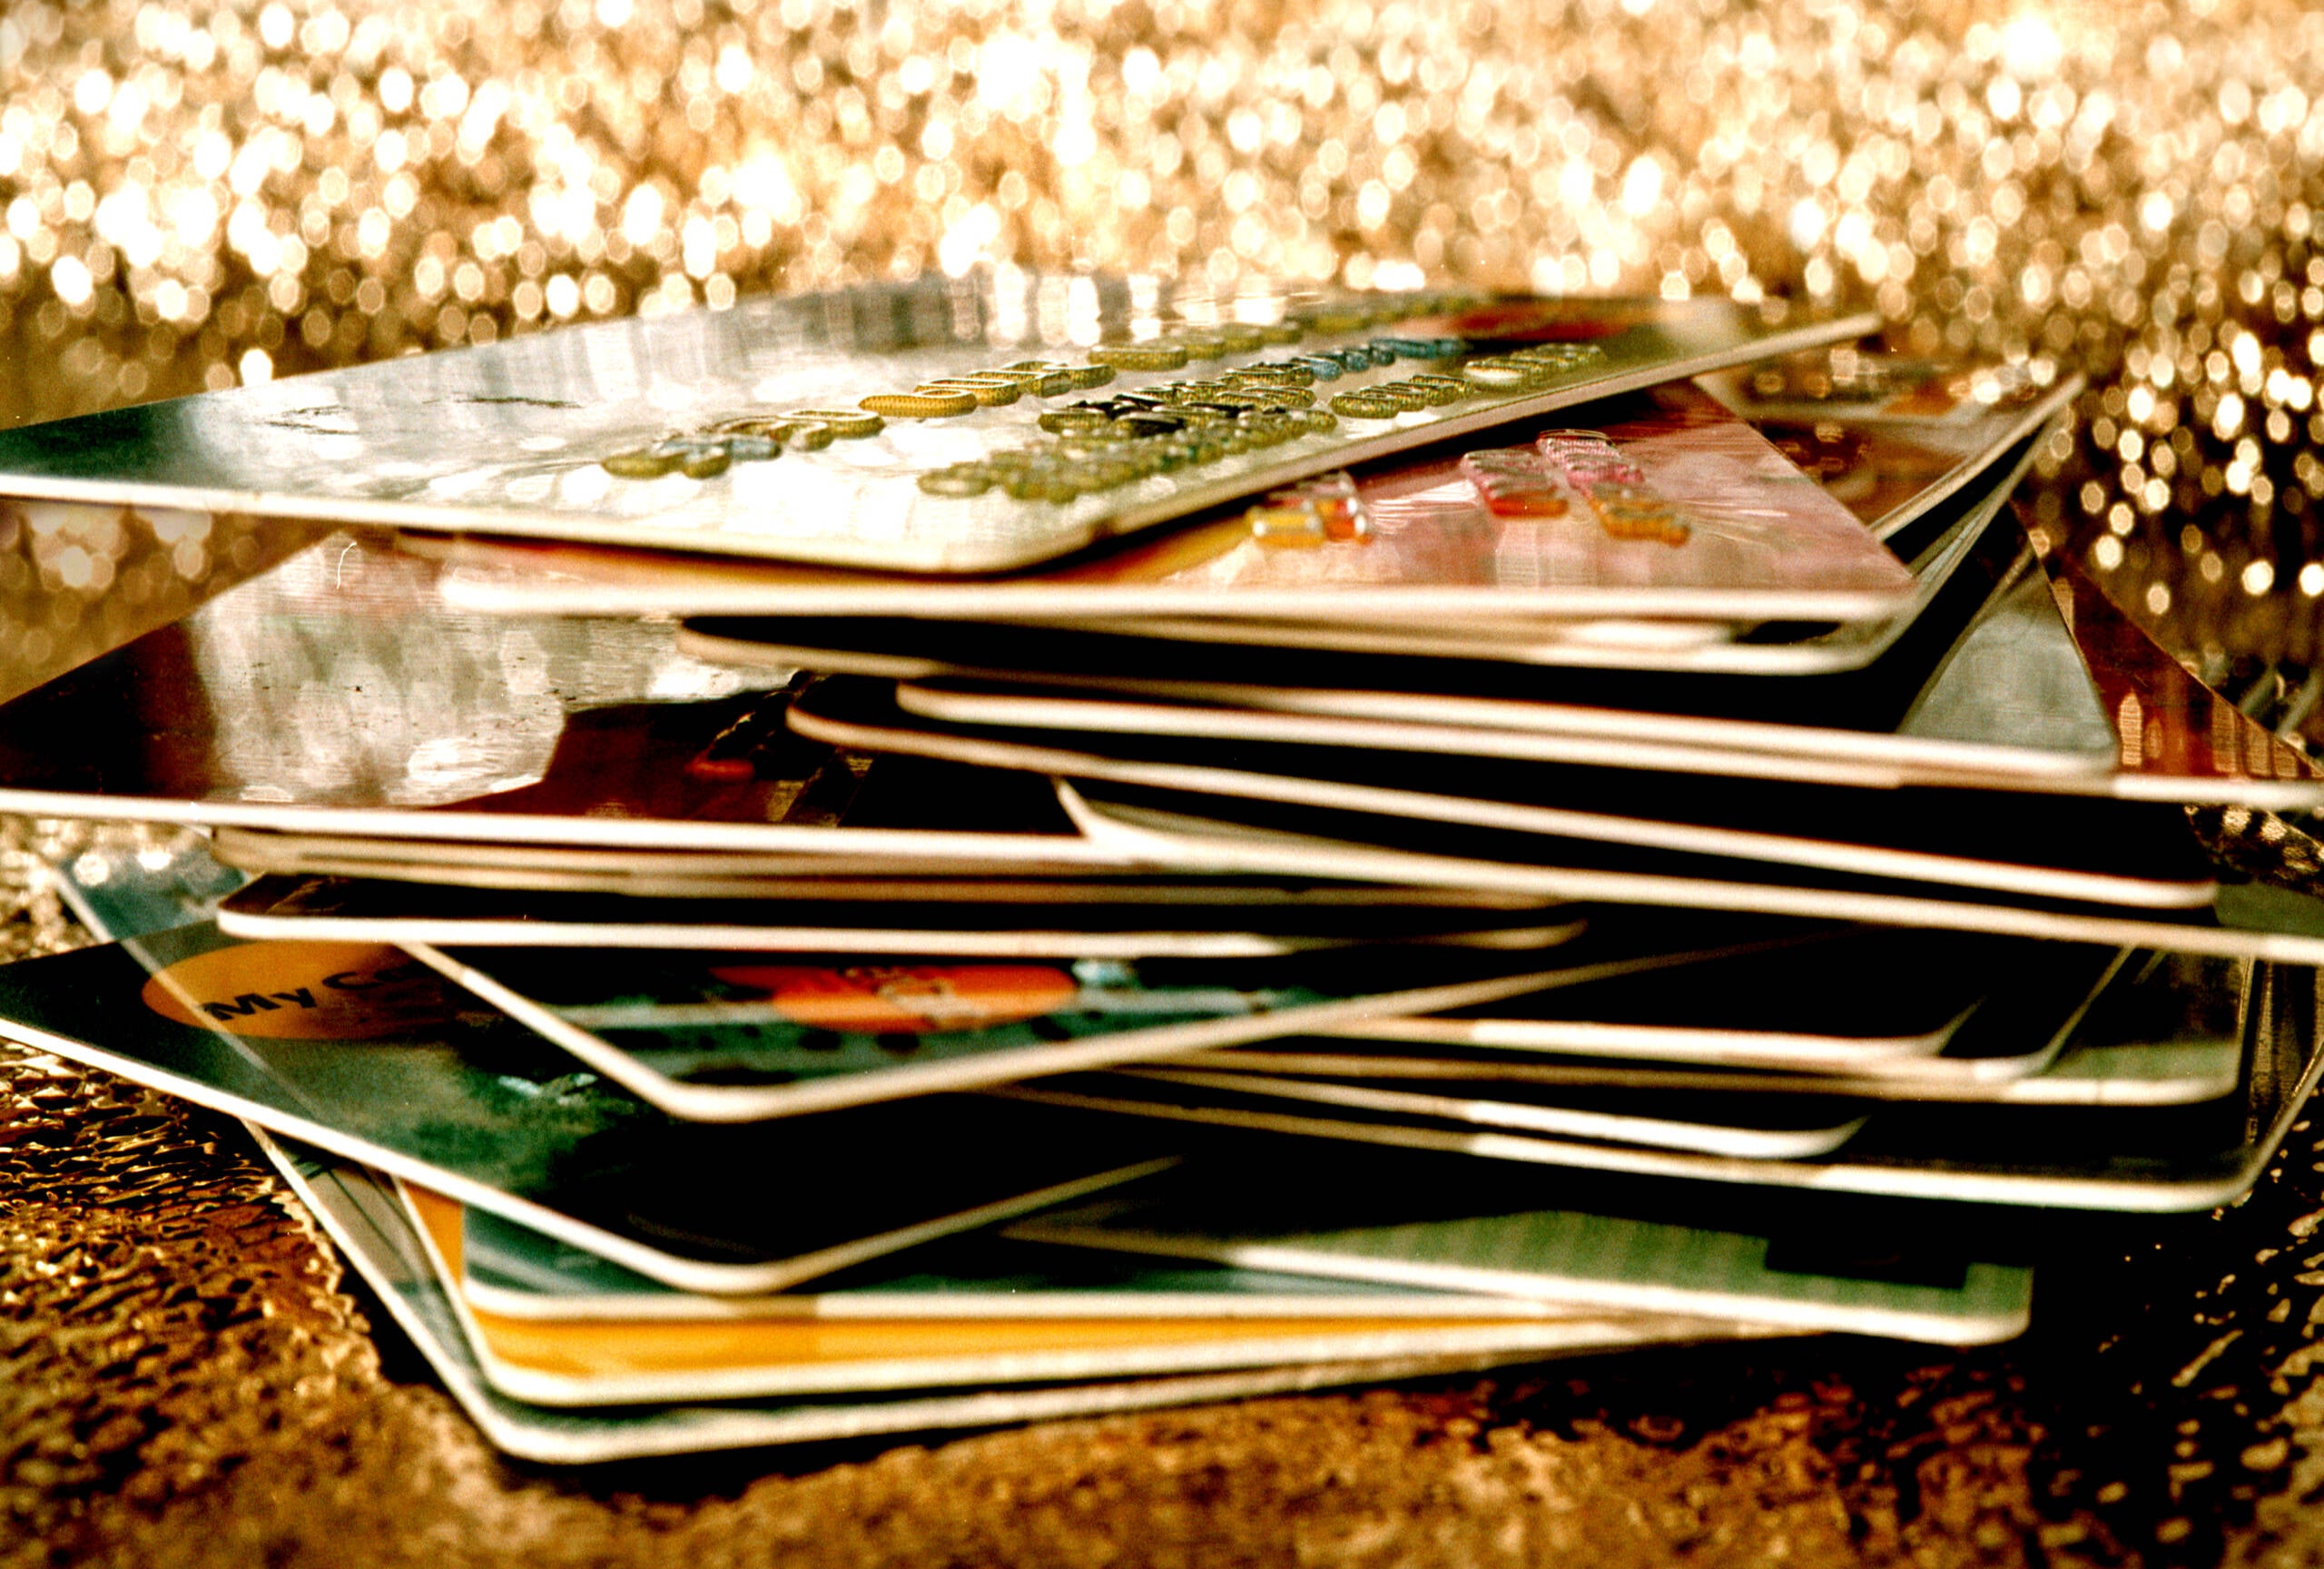 photo shows a large stack of credit cards in a pile against a gold, bedazzled background